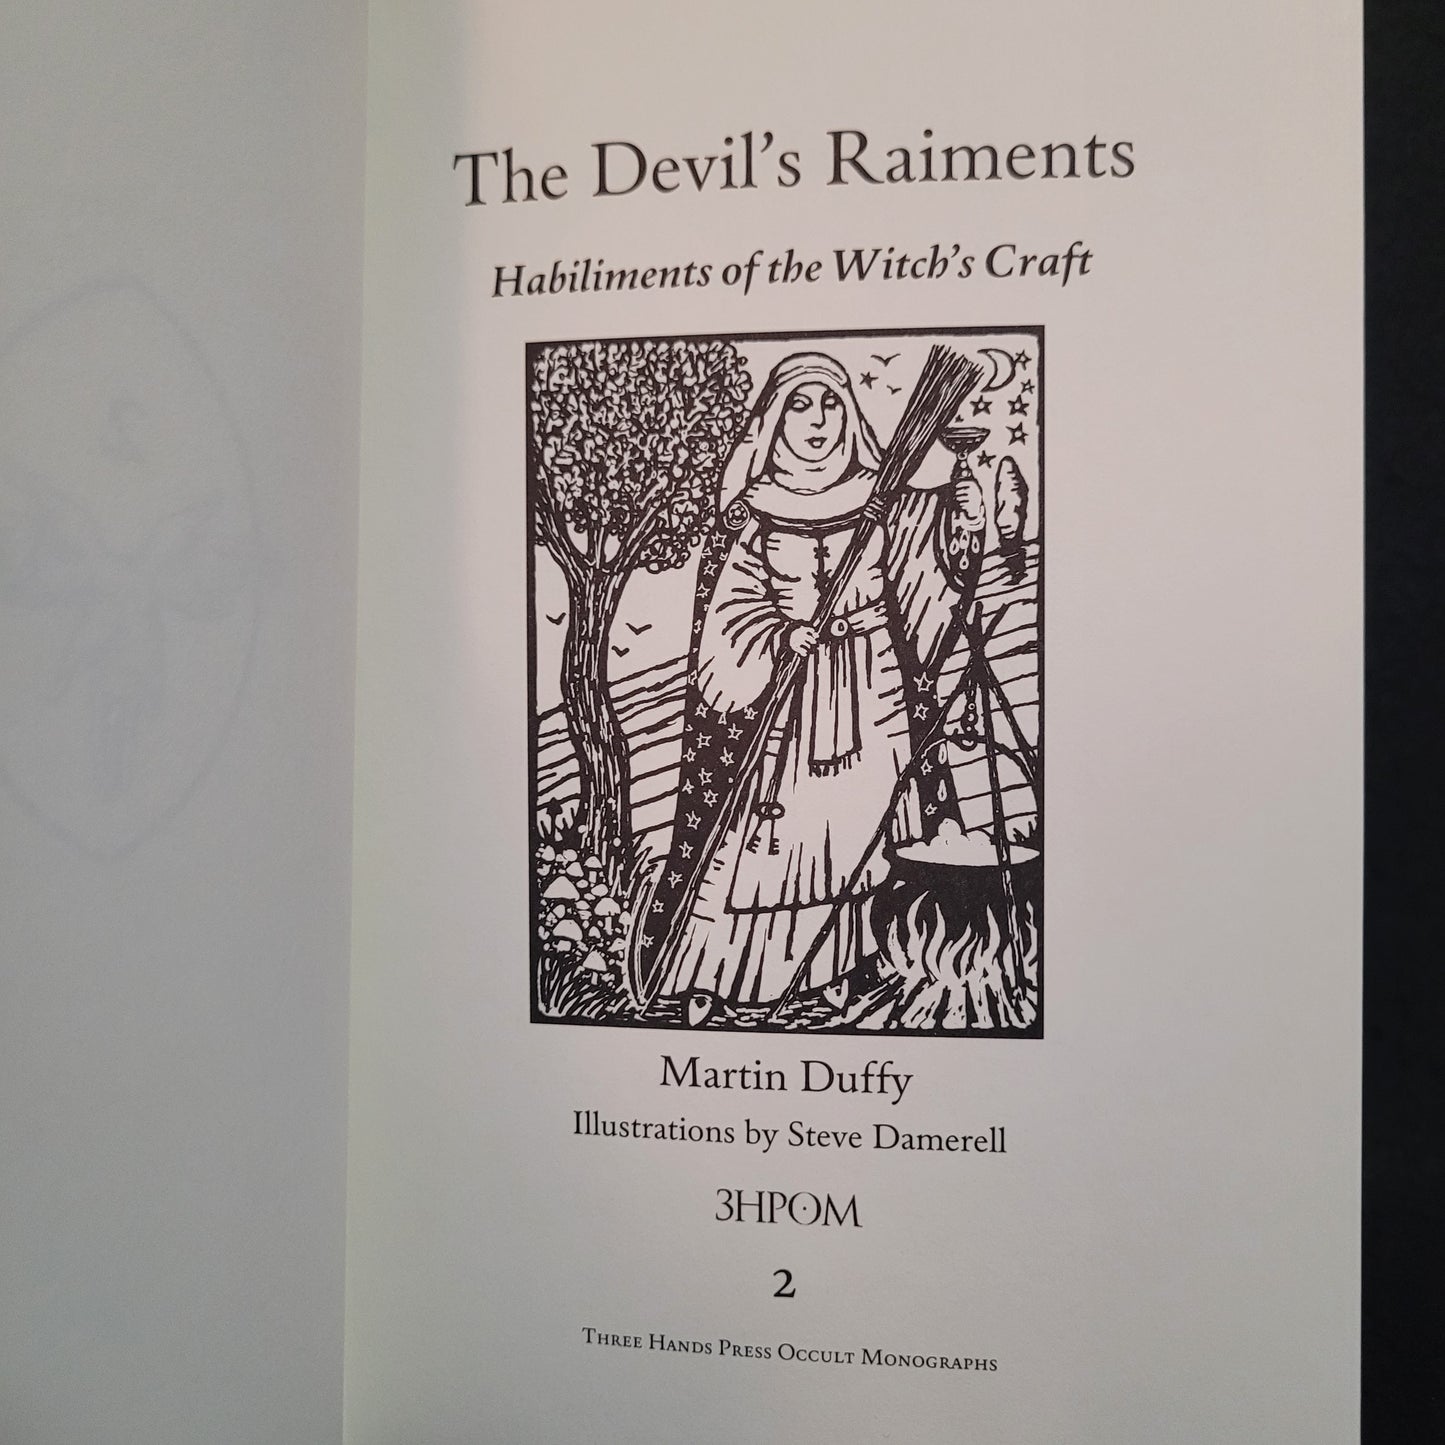 The Devil's Raiments: Habiliments of the Witch's Craft by Martin Duffy (Three Hands Press Occult Monographs, 2012) Hardcover with Dust Jacket